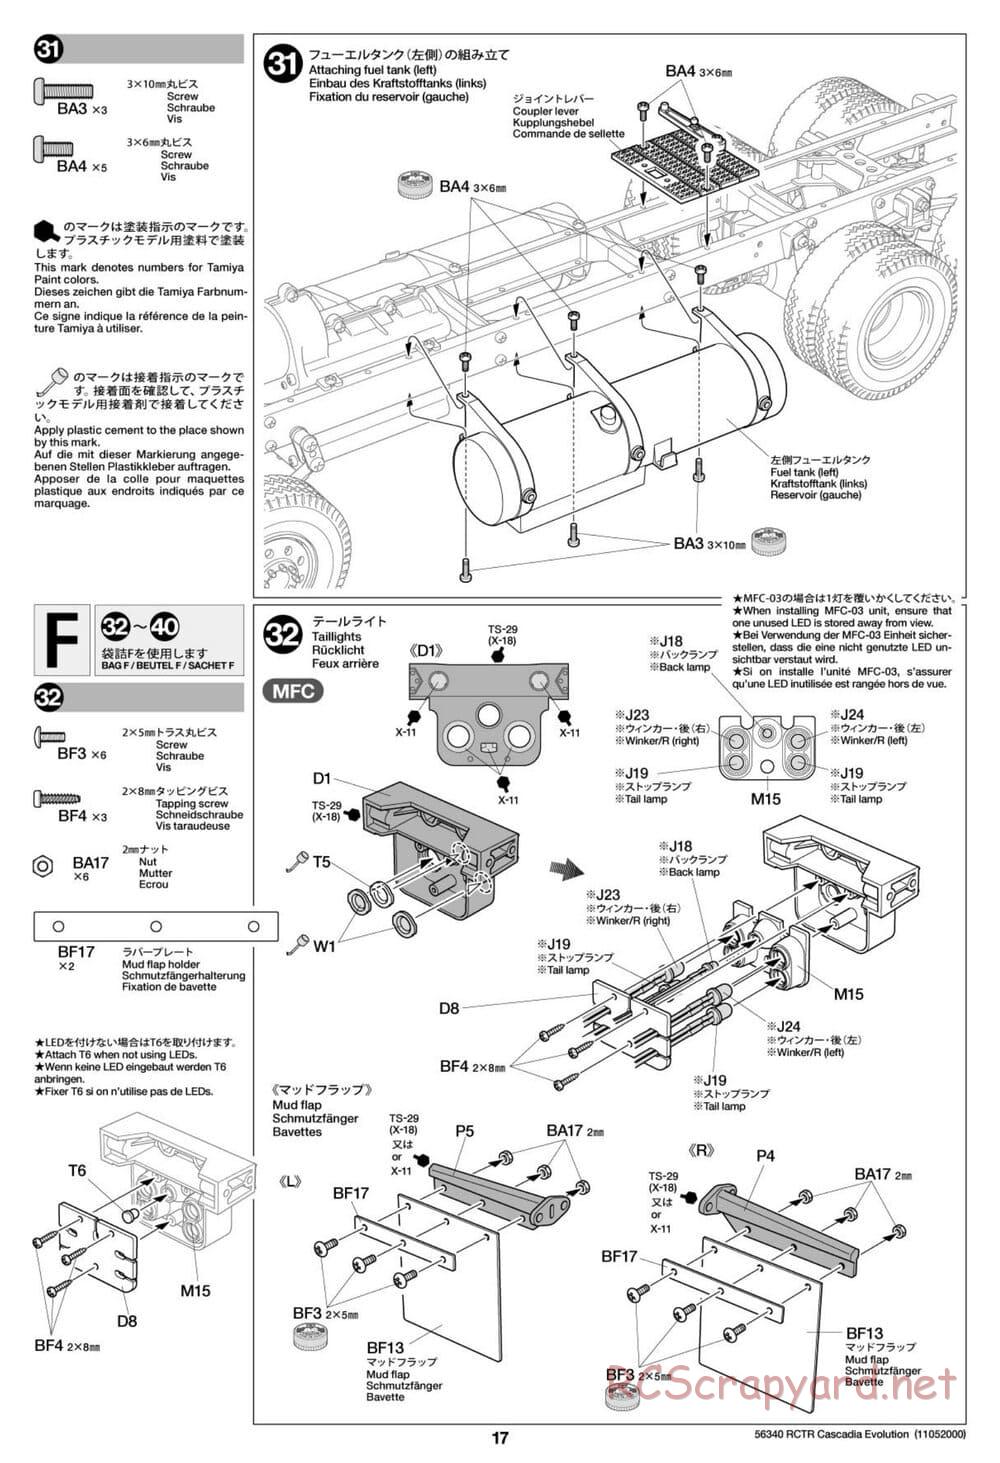 Tamiya - Freightliner Cascadia Evolution Tractor Truck Chassis - Manual - Page 17